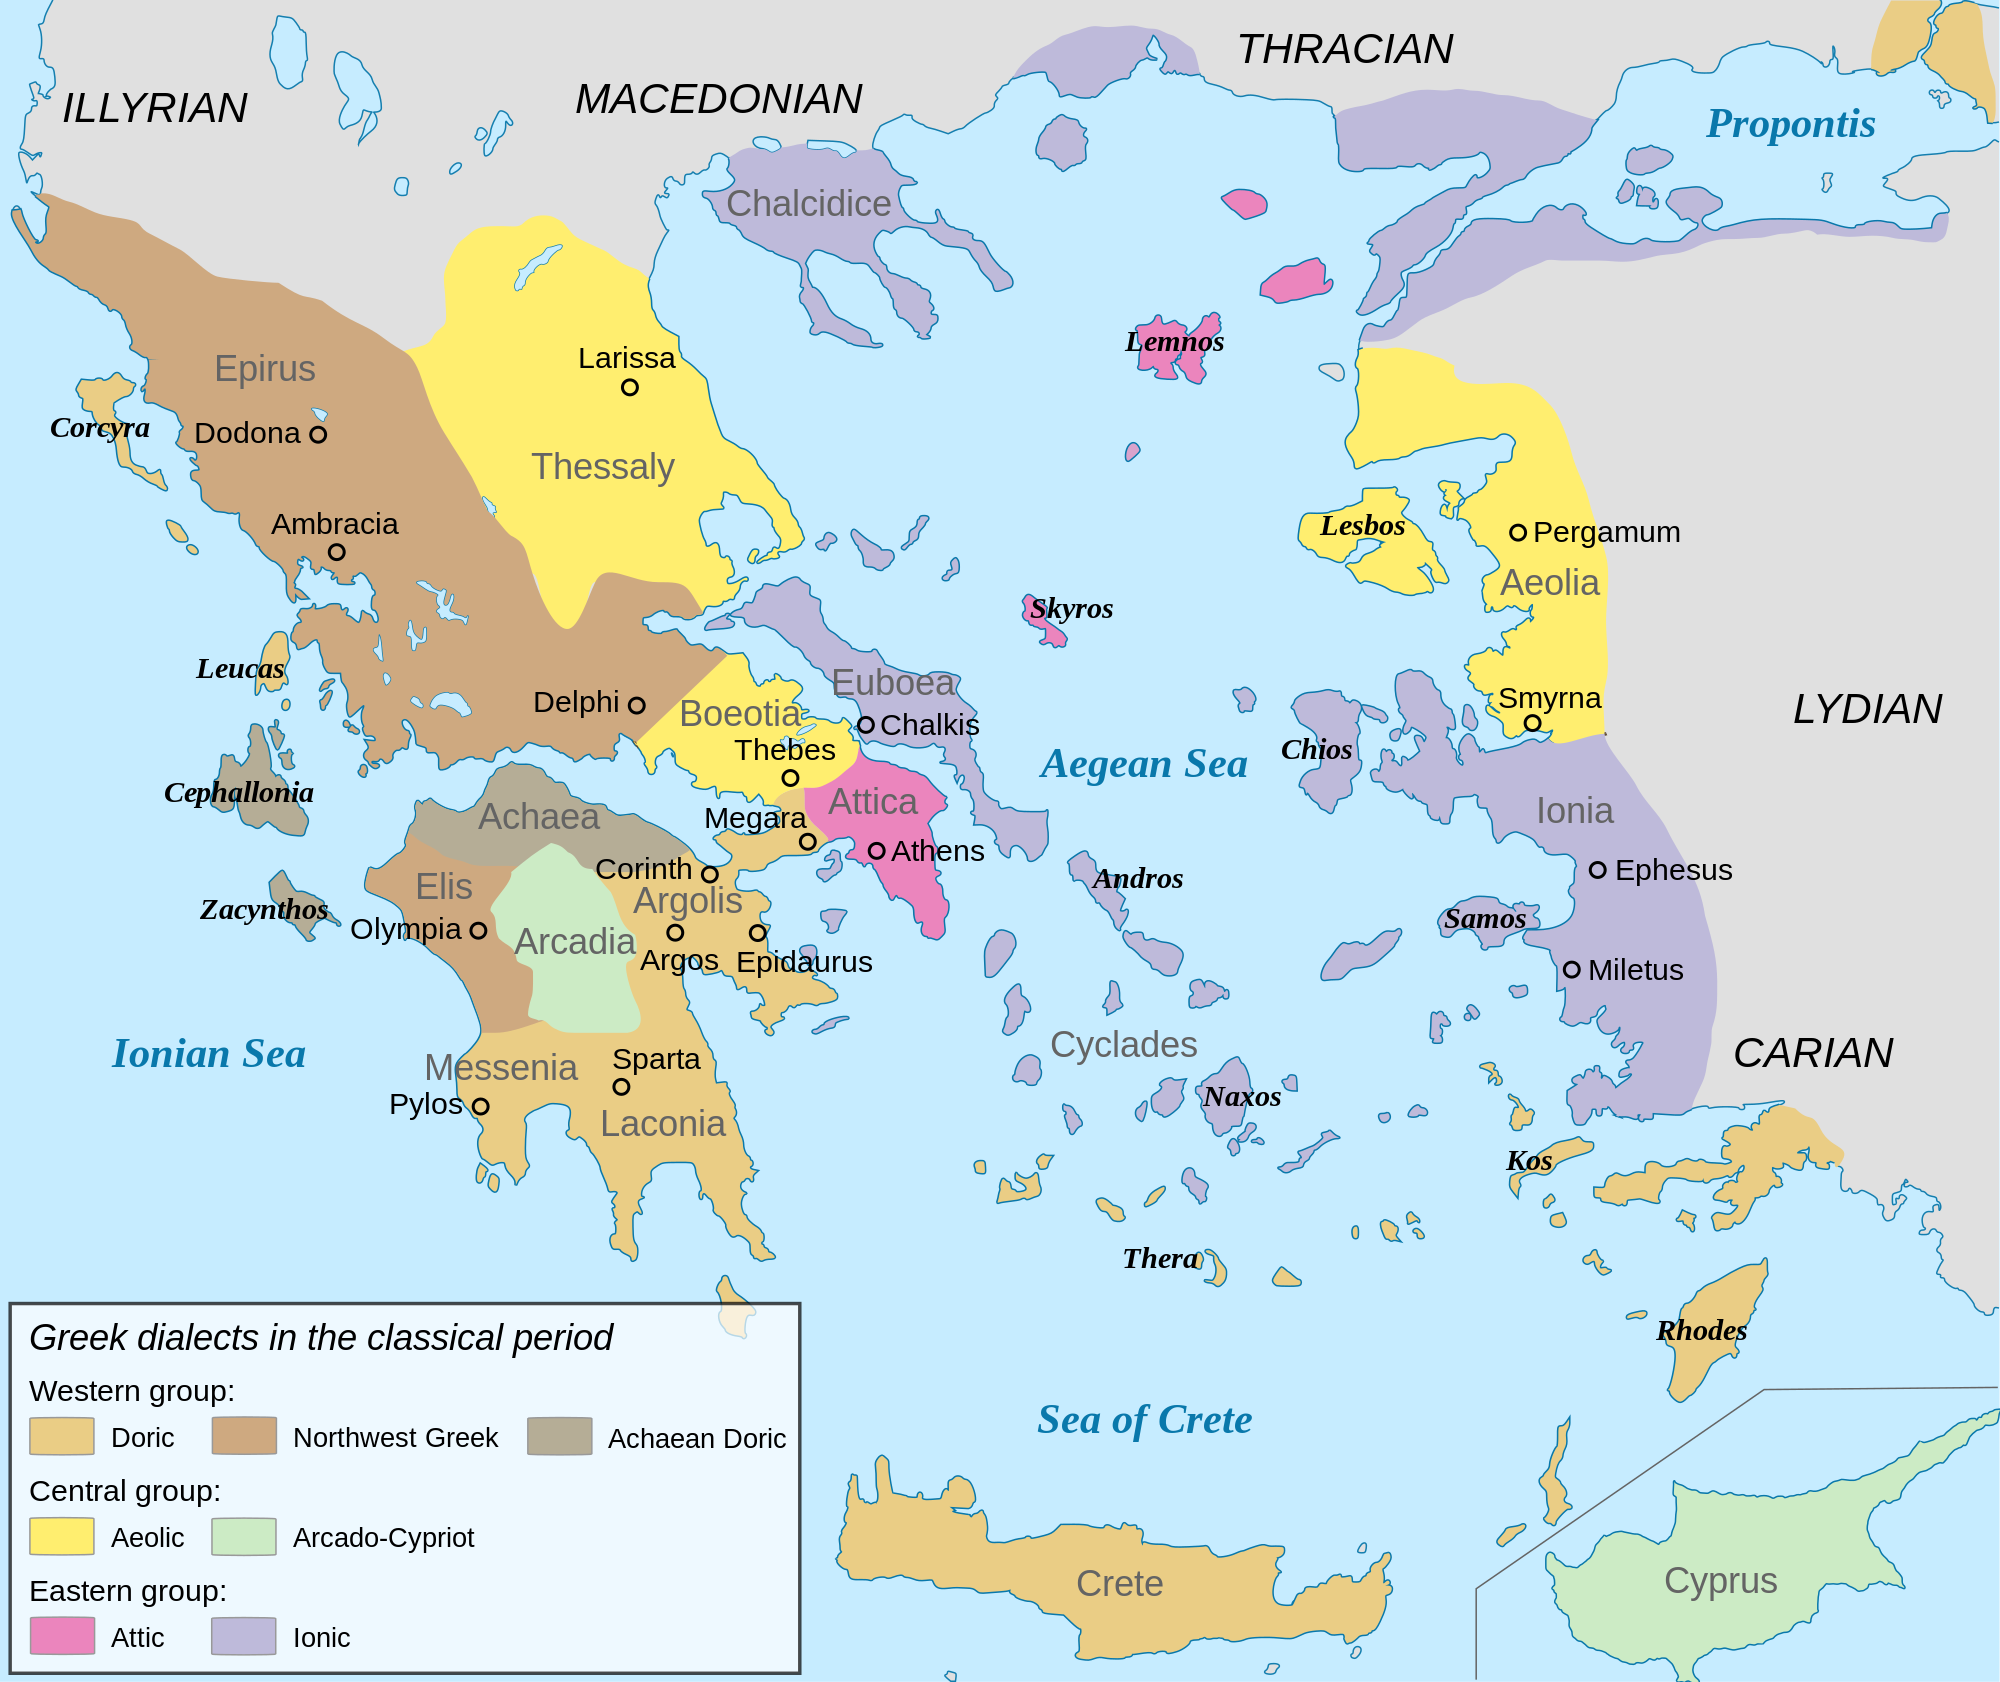 2000px-AncientGreekDialects_%28Woodard%29_en.svg.png